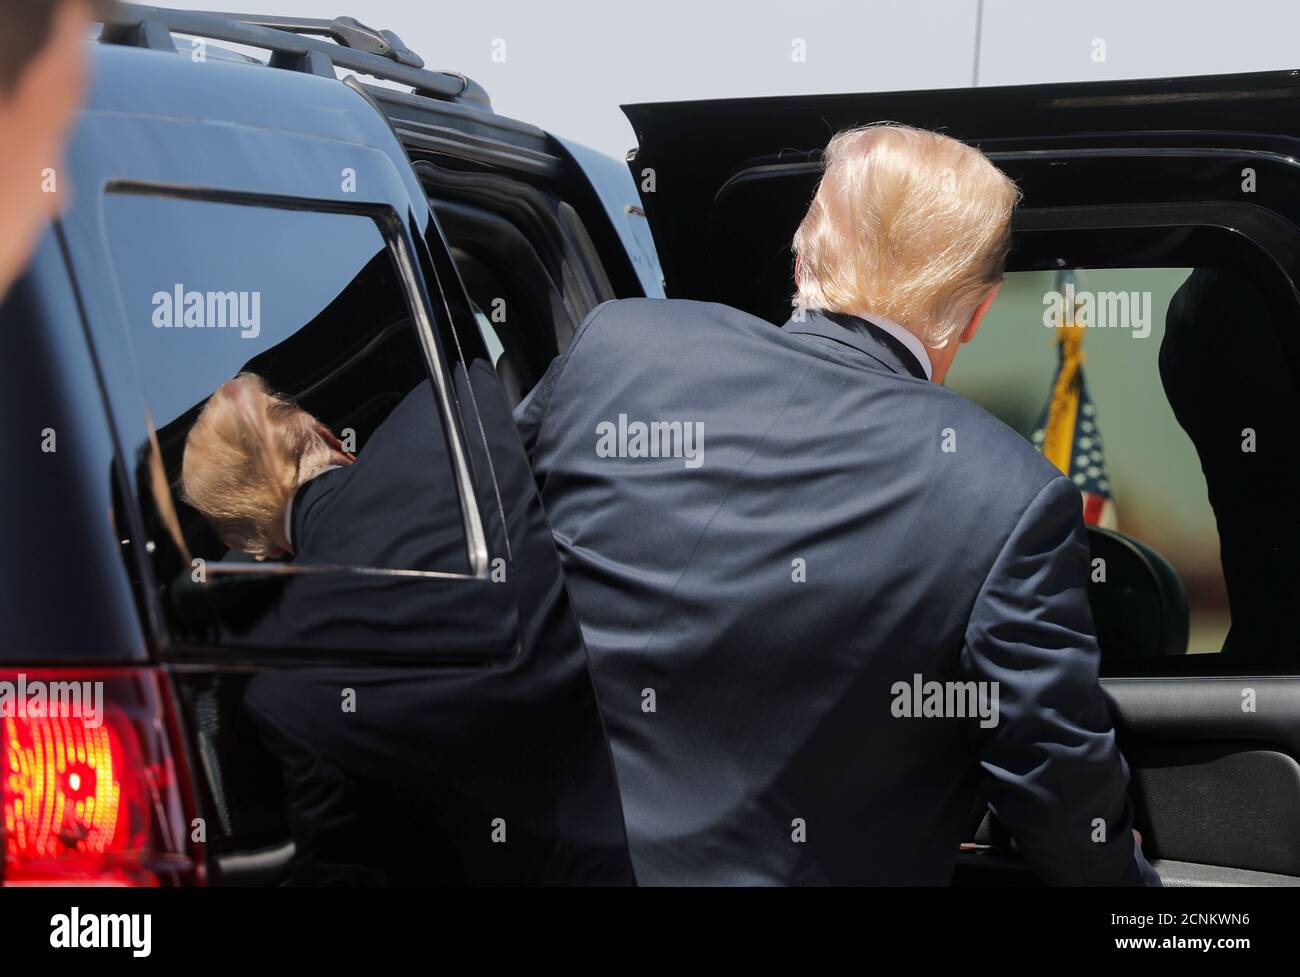 U.S. President Donald Trump gets into his armored U.S. Secret Service sports utility vehicle as he arrives to visit a nearby U.S. Border Patrol station and a U.S.-Mexico border wall site after landing at Marine Corps Air Station Yuma in Yuma, Arizona, U.S., June 23, 2020. REUTERS/Carlos Barria Stock Photo